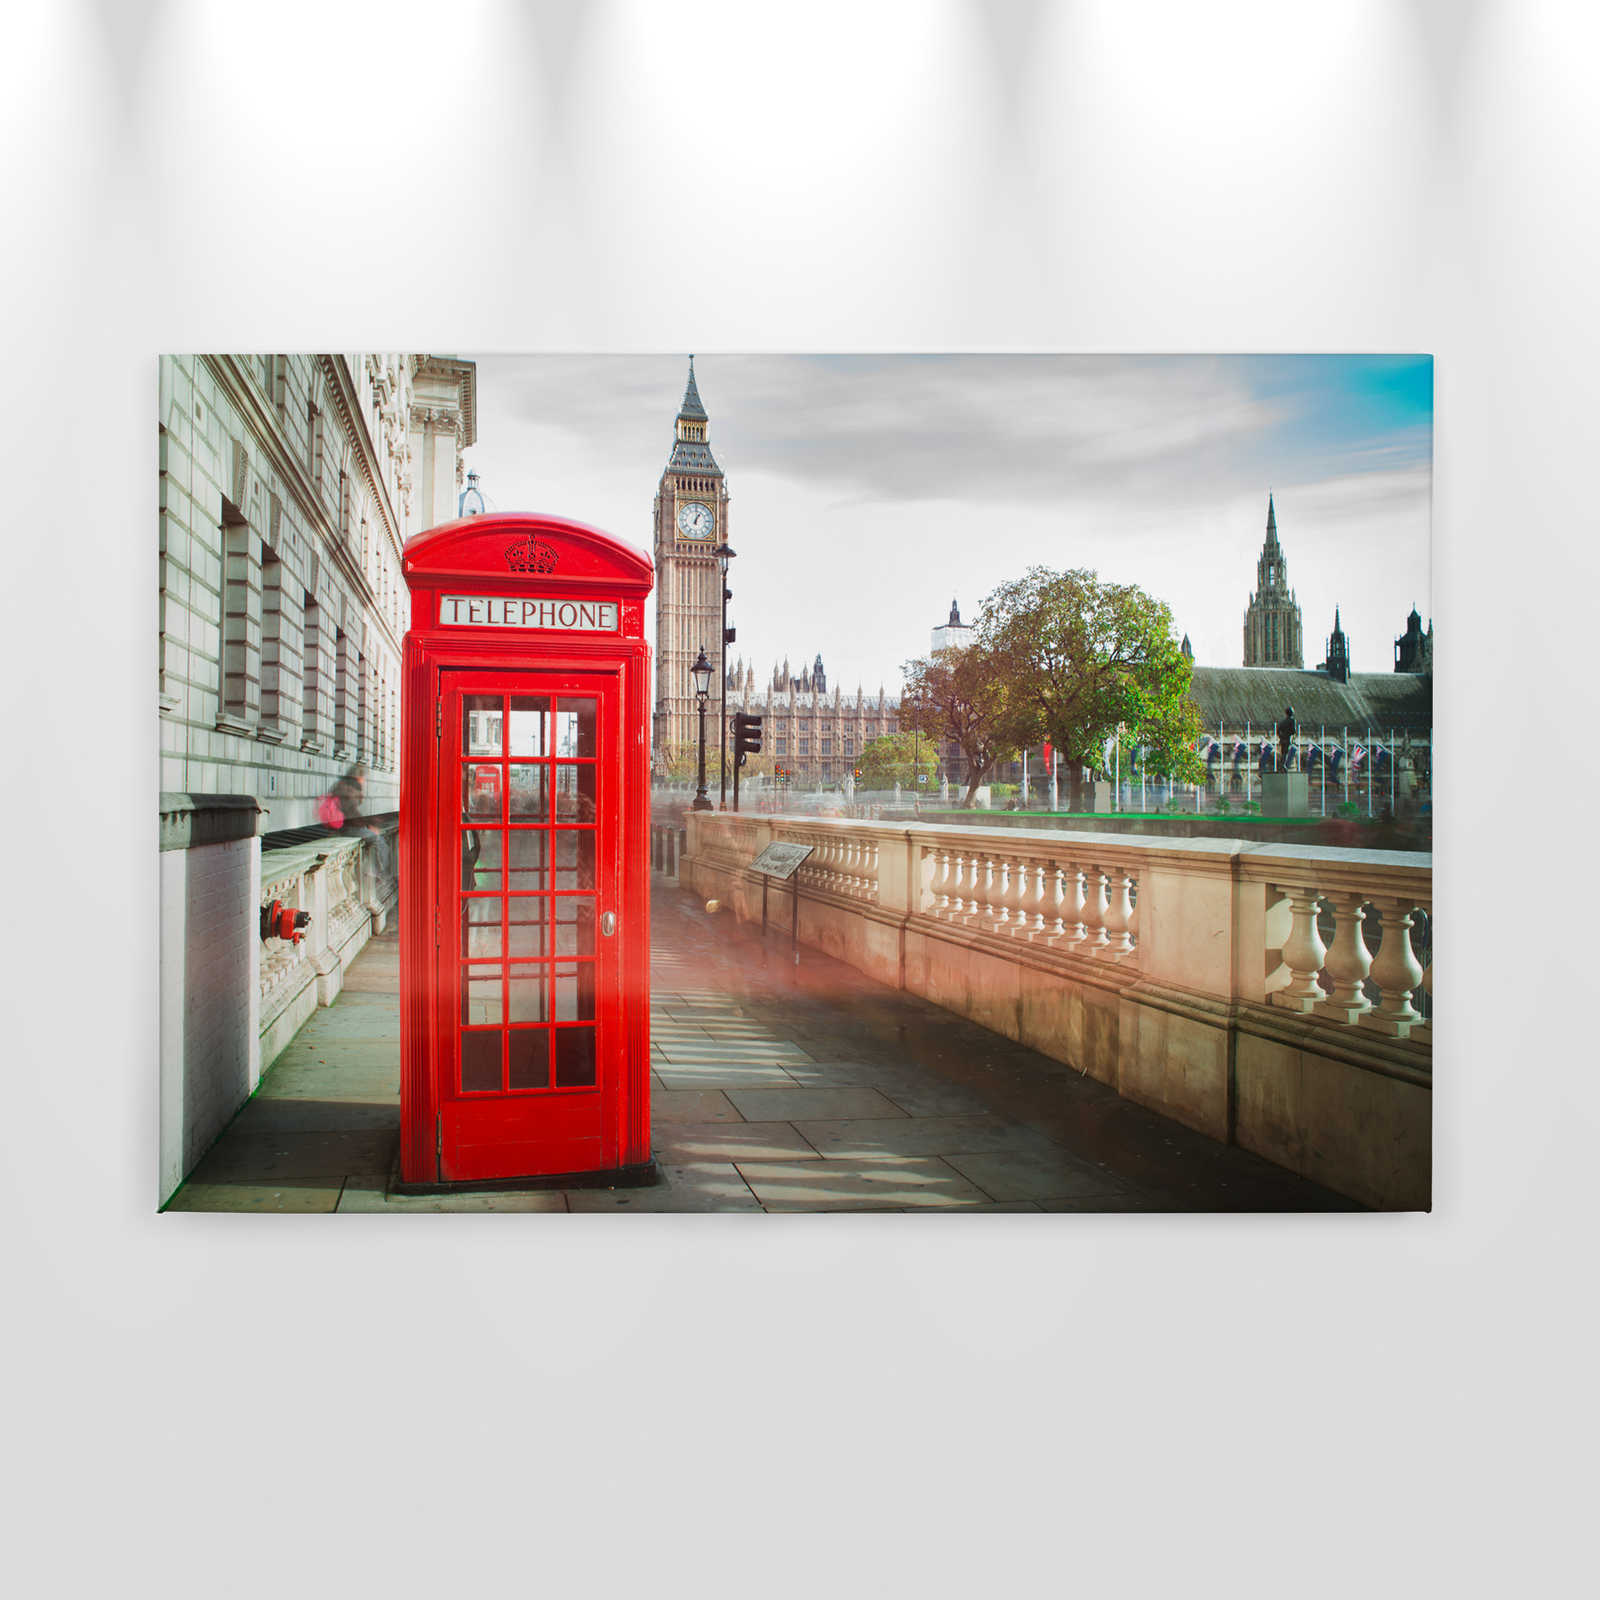             Leinwand mit roter Telefonzelle in London – 0,90 m x 0,60 m
        